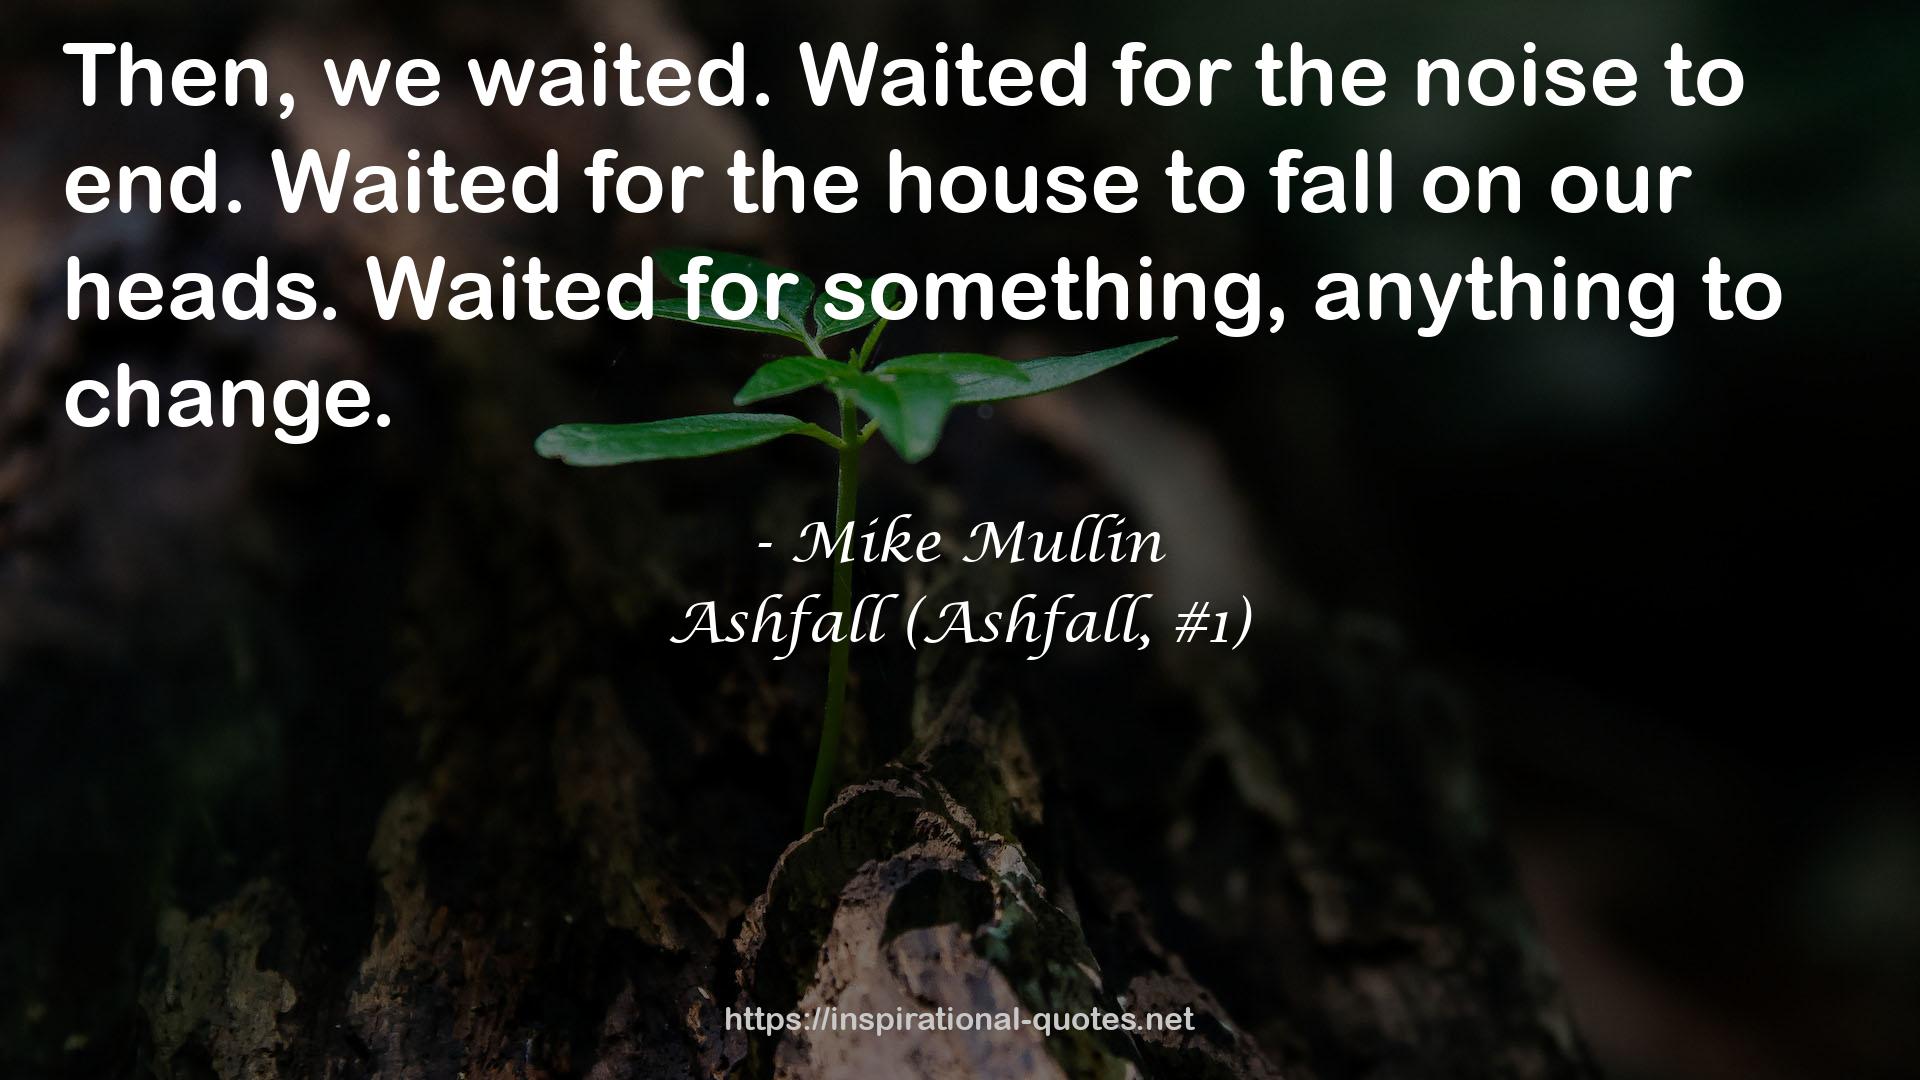 Mike Mullin QUOTES